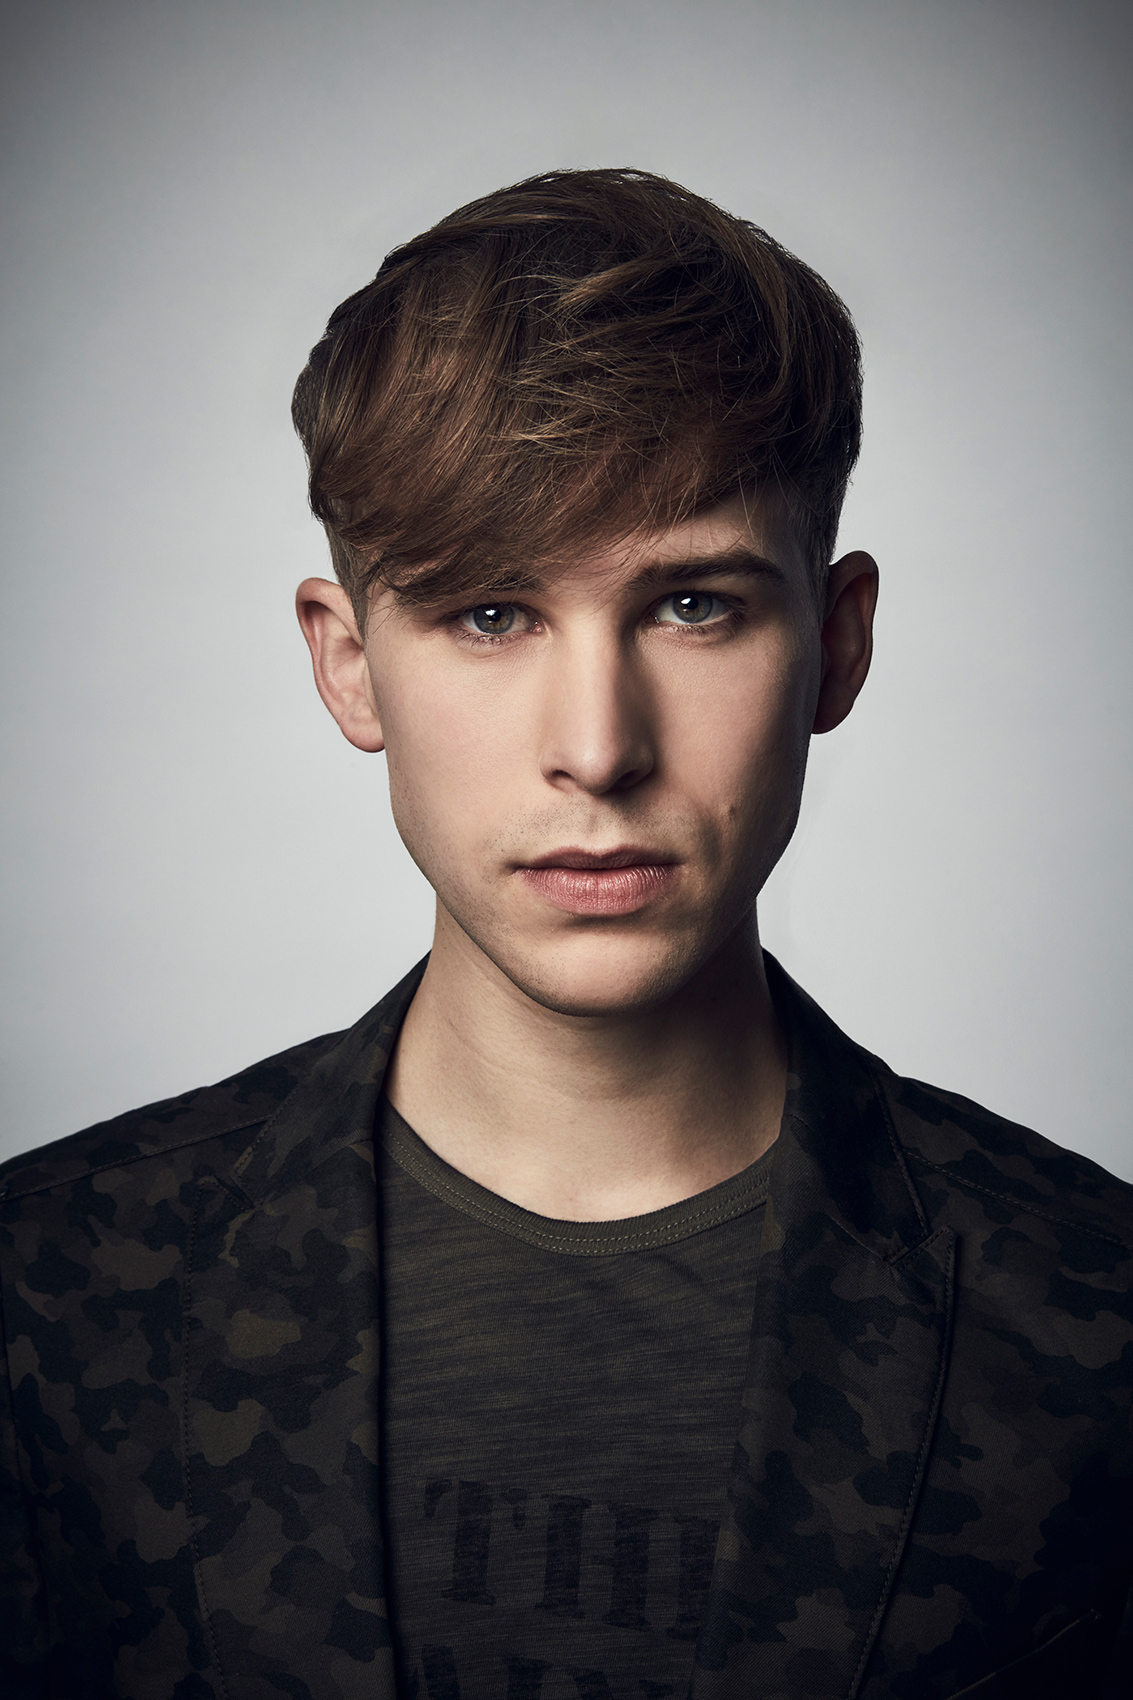 13 REASONS WHY TOMMY DORFMAN